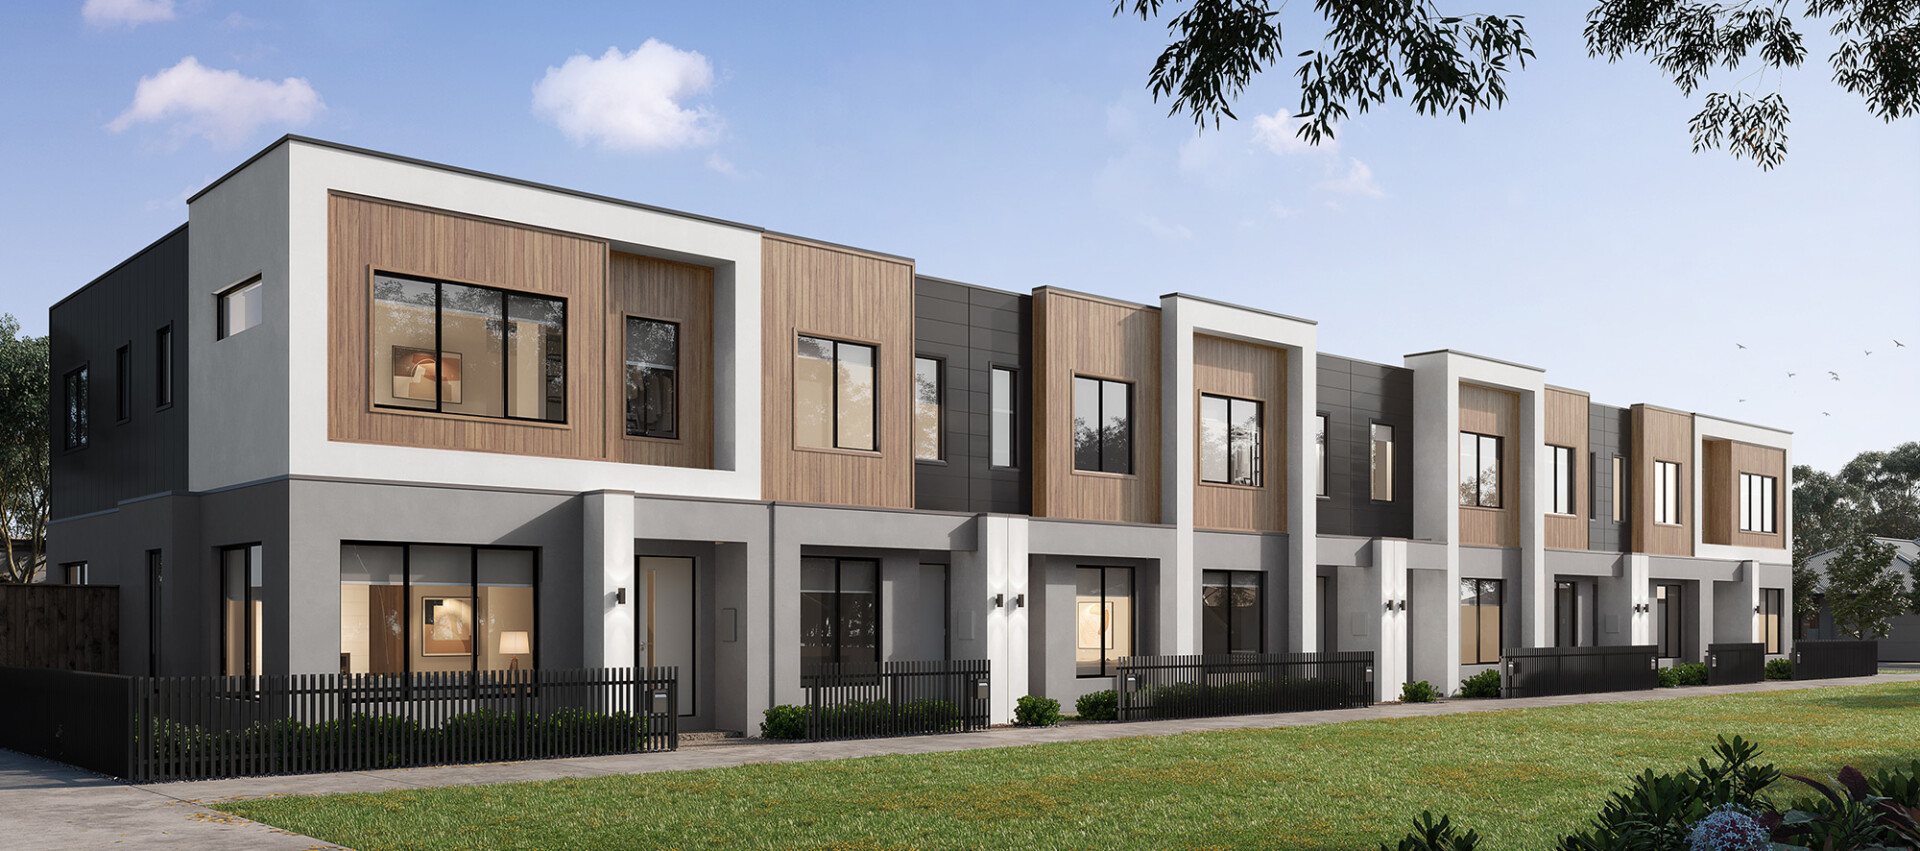 Aurora Estate town house projects by Melbourne town house builder Homebuyers Centre.